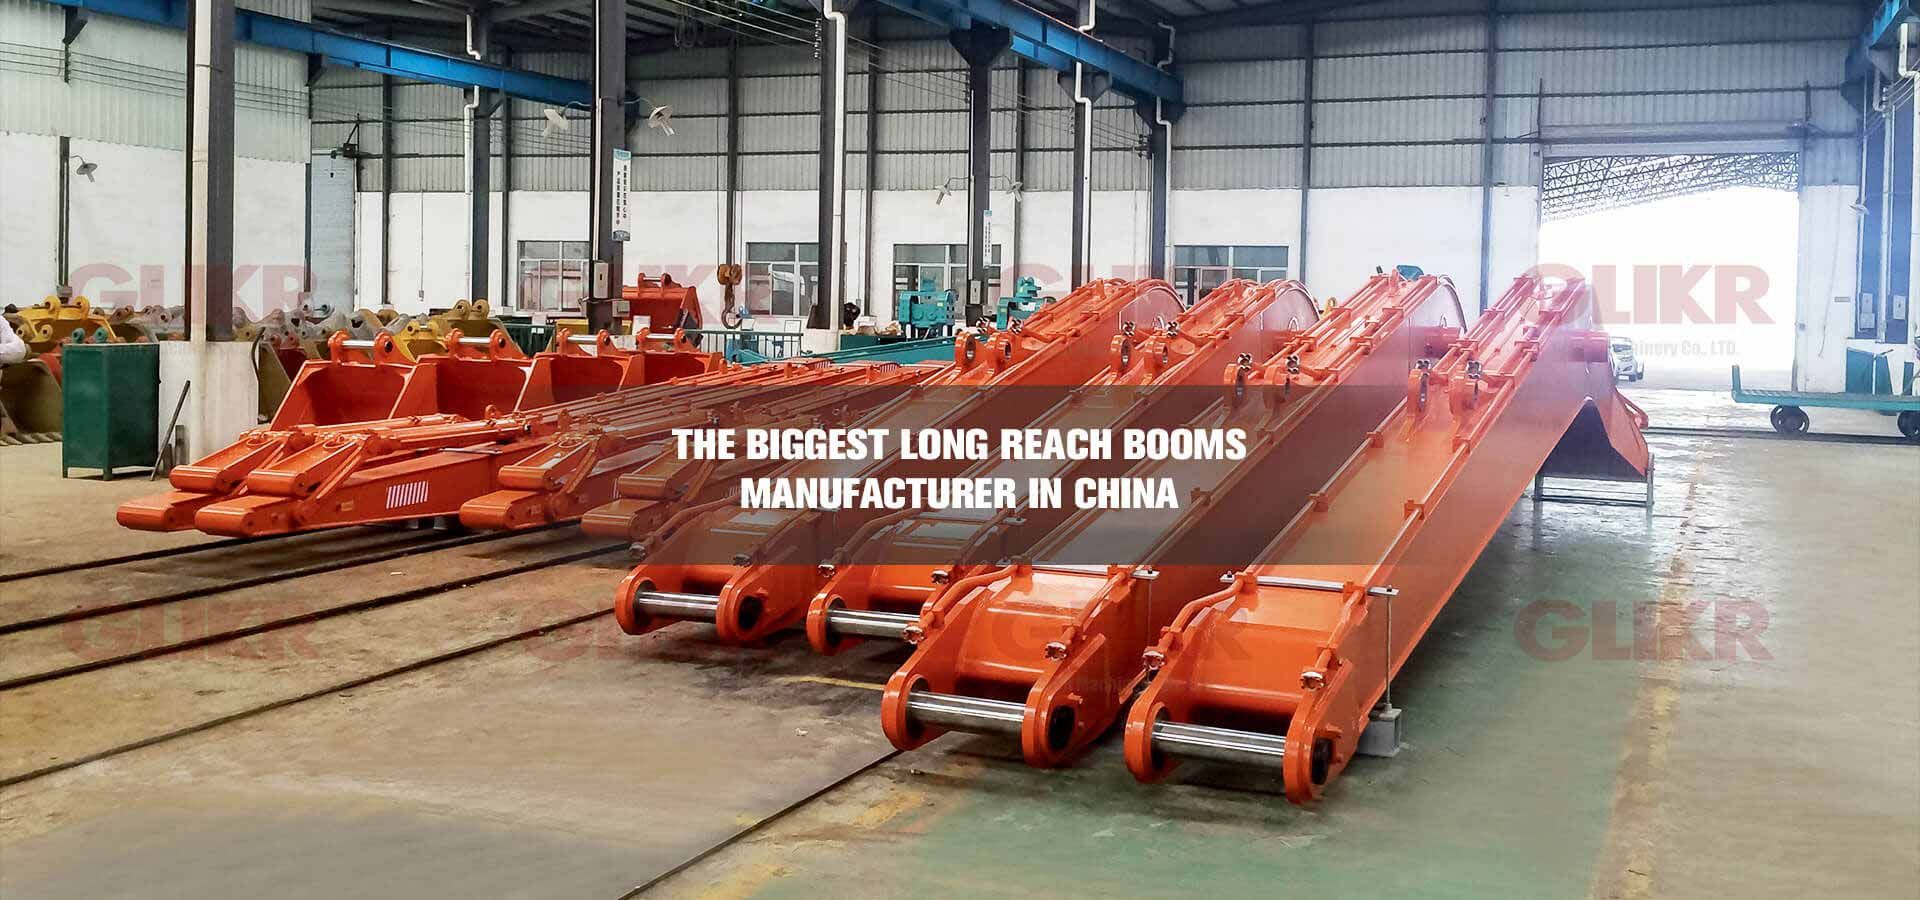 THE BIGGEST LONG REACH BOOMS MANUFACTURER IN CHINA!